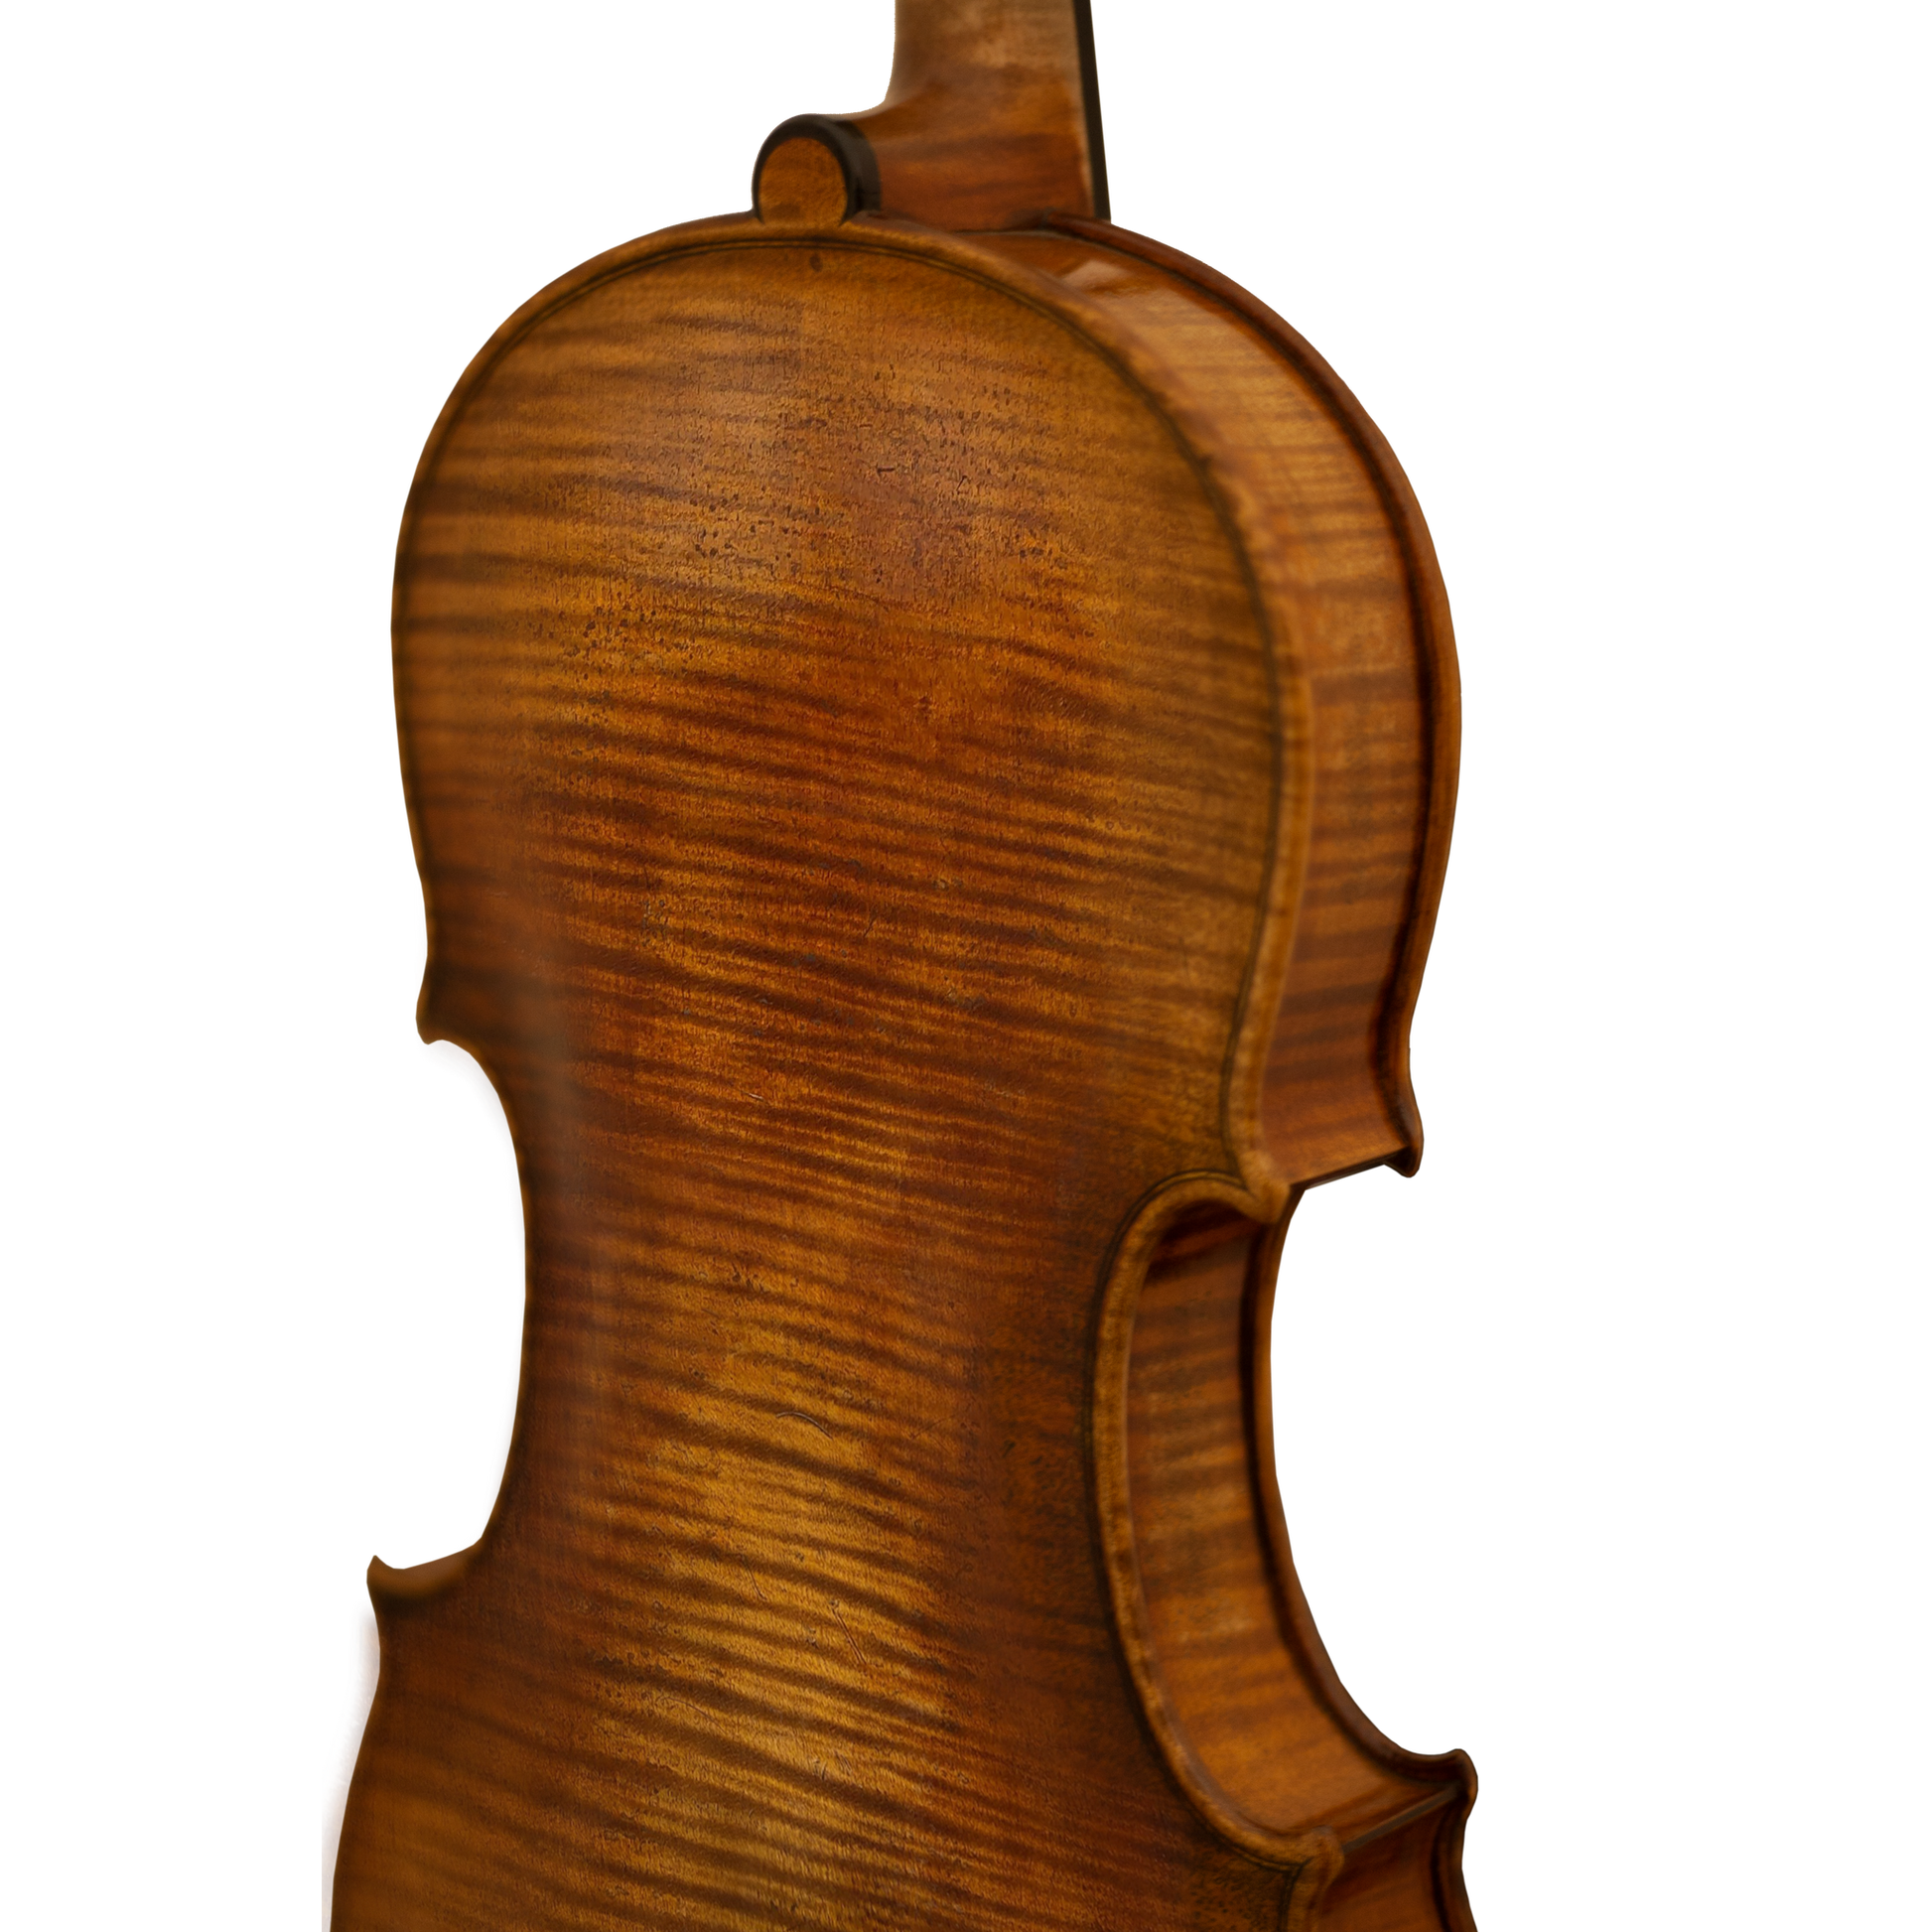 Bench Copy "Haddock" Maple Leaf Strings Professional Violin with Case String Power - Violin Shop